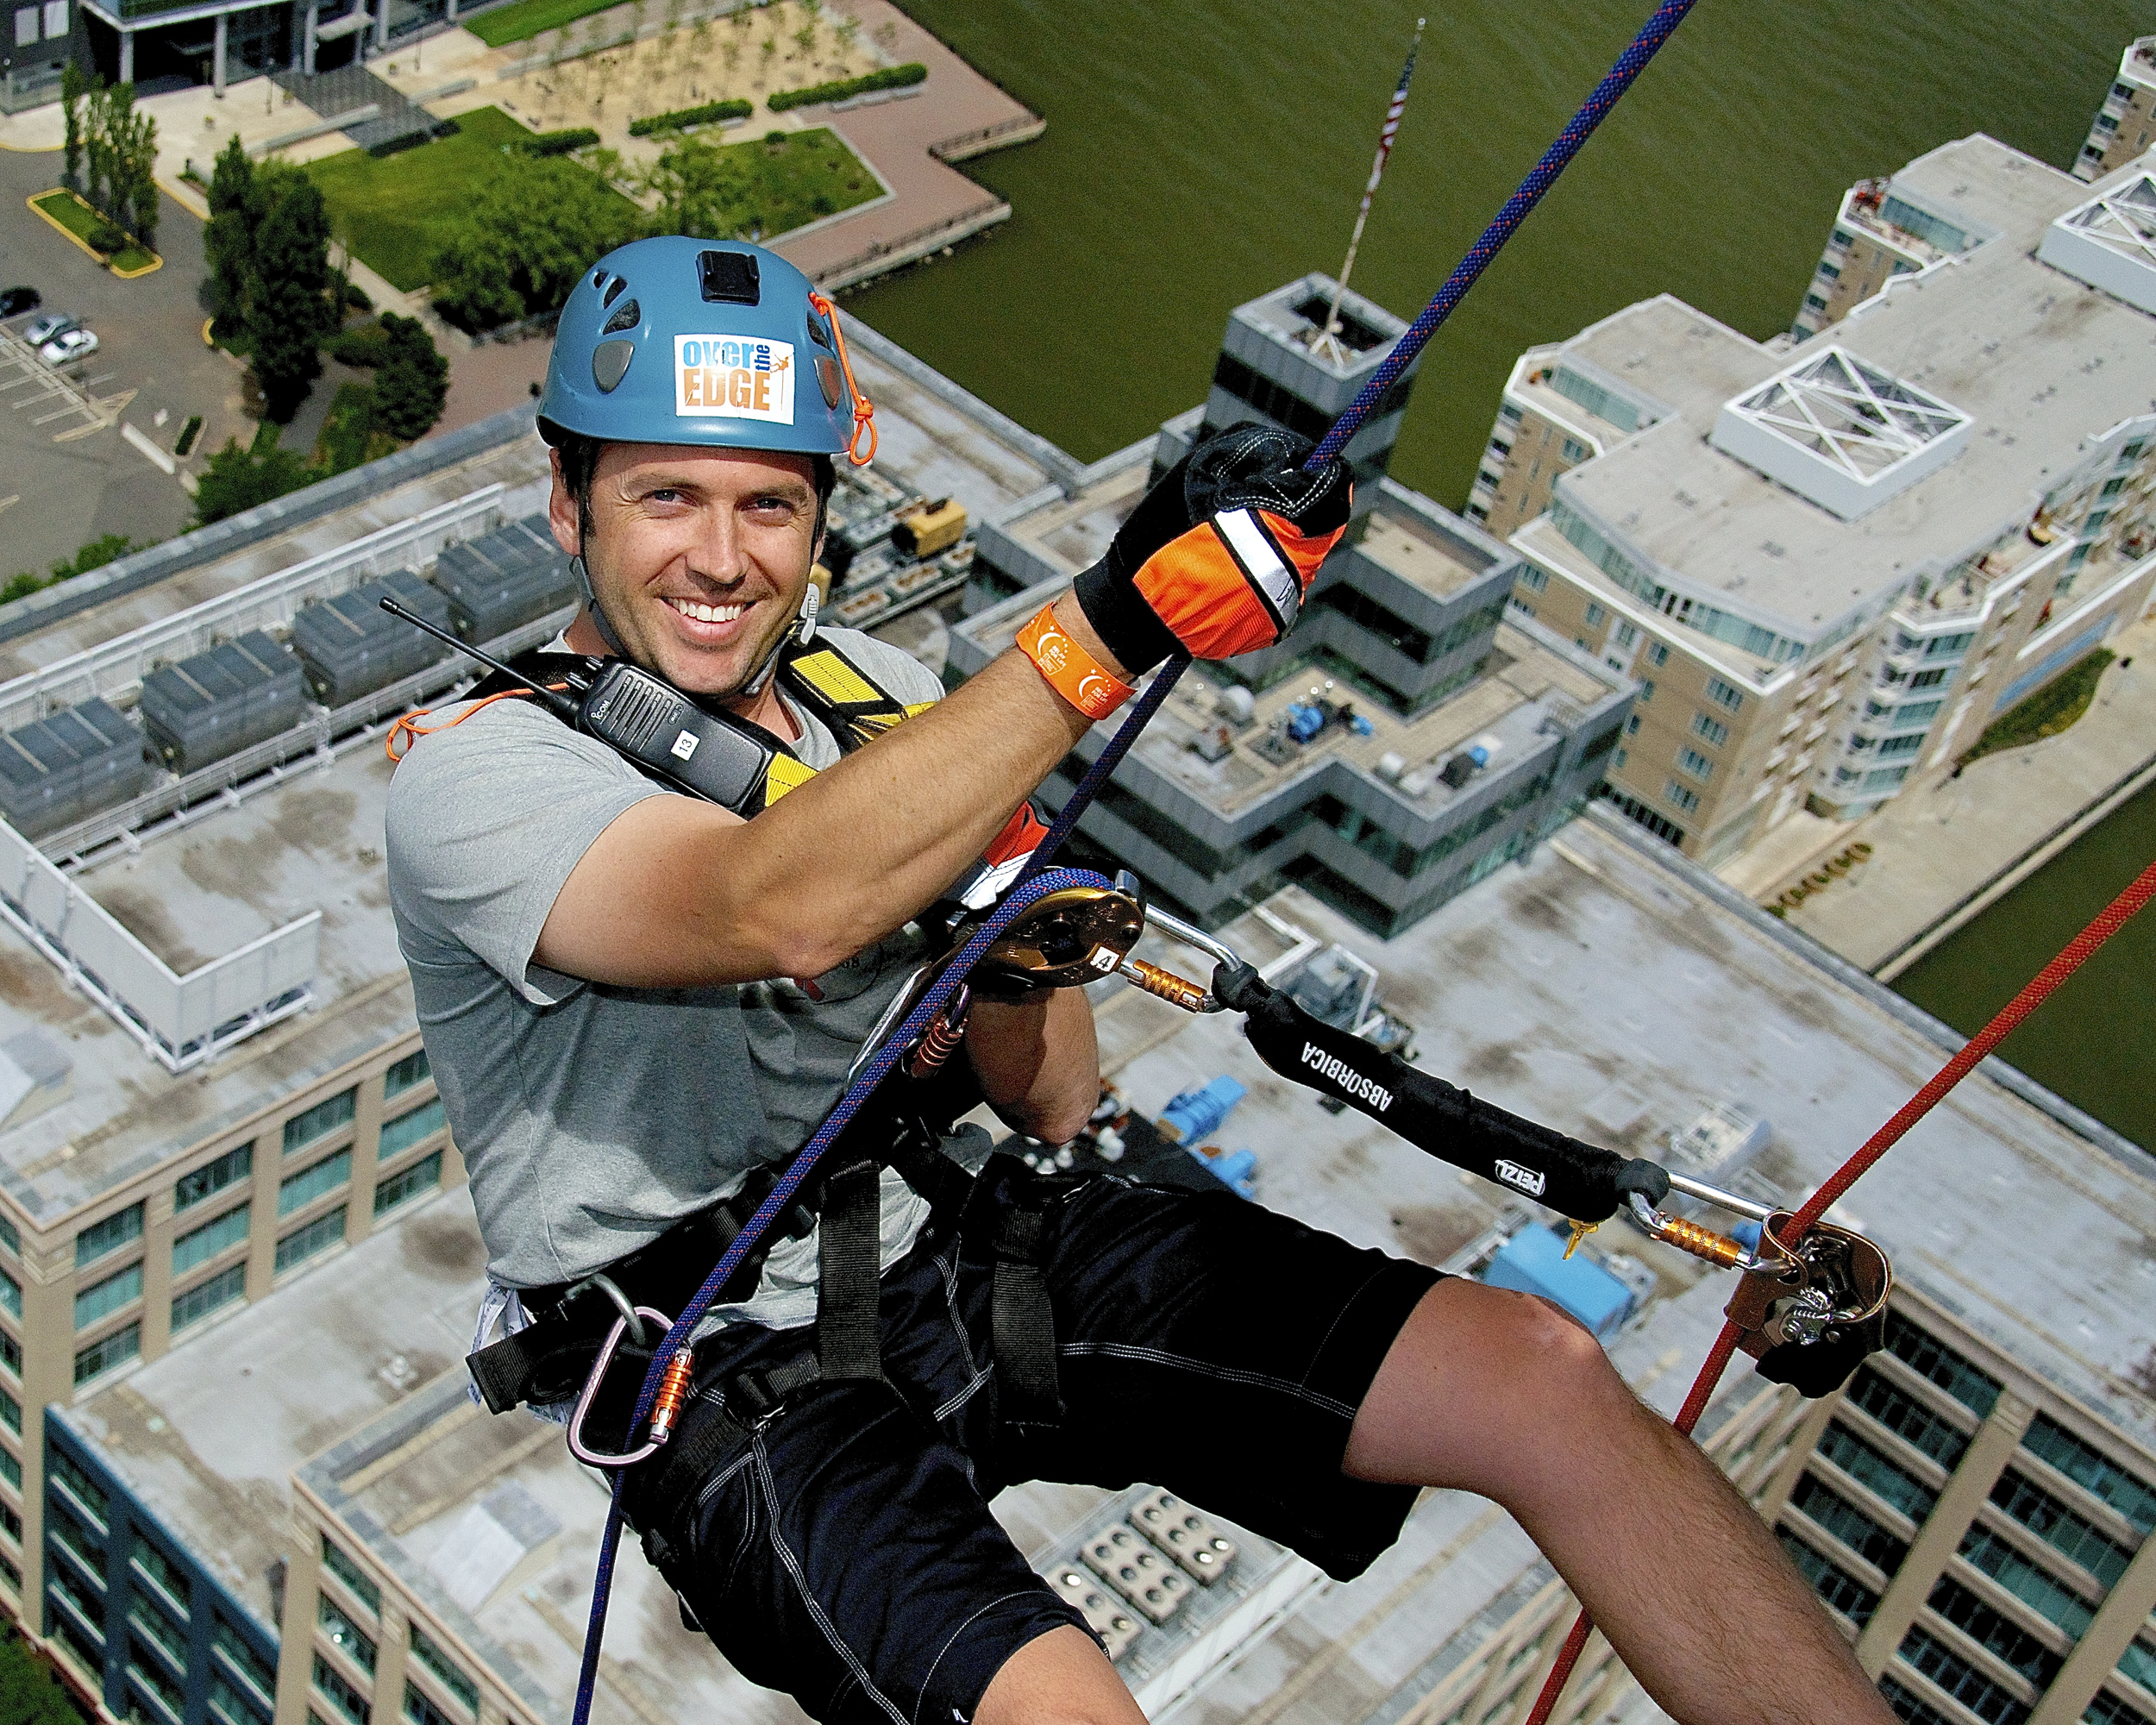 Over The Edge, American Cancer Society, Jersey City, NJ.